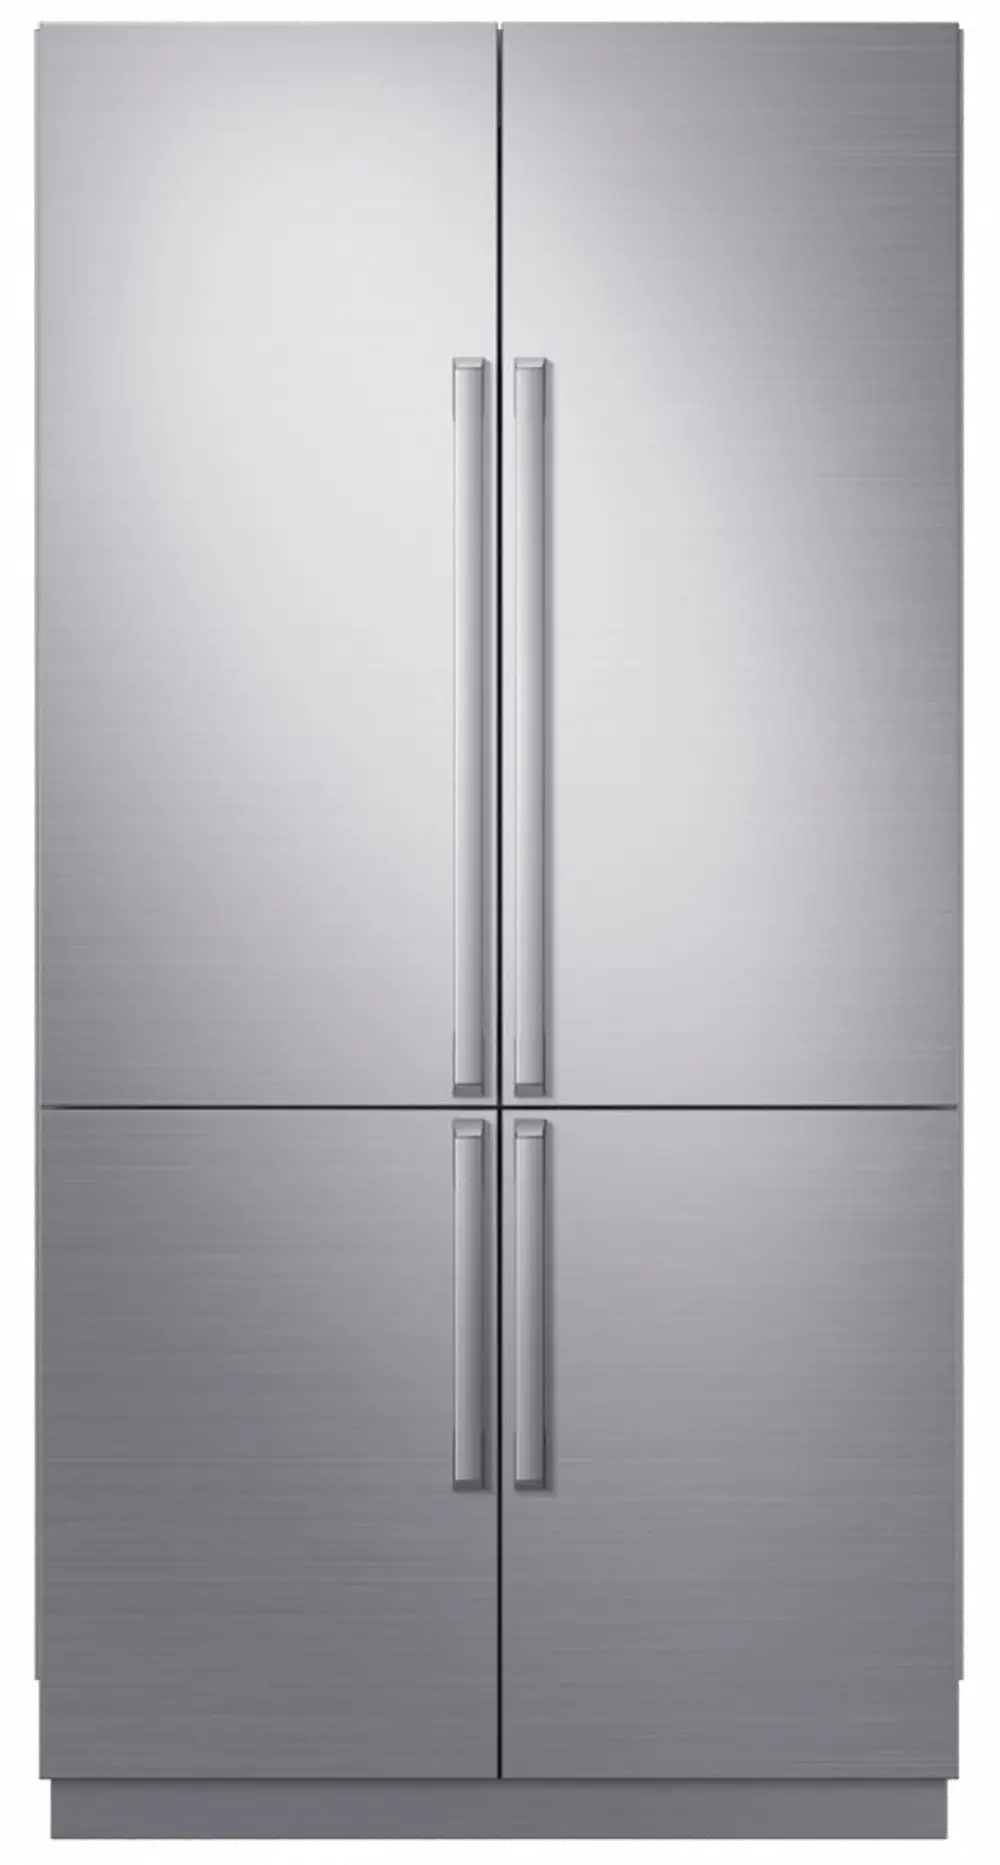 RAT42ACAAS4/AA Samsung Chef Accessory Kit for 42 Inch Built In Refrigerator - Stainless Steel-1